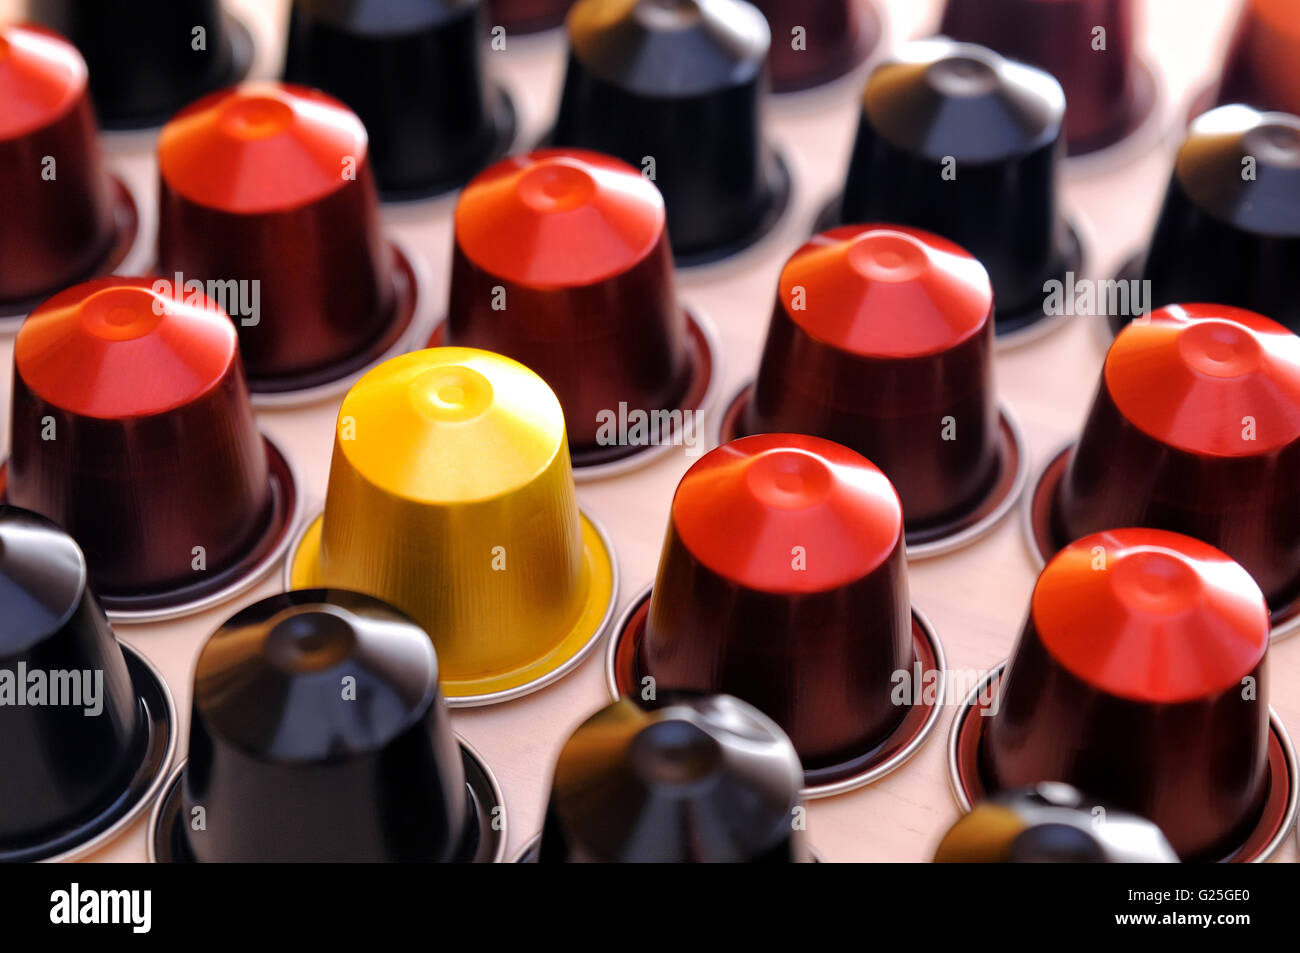 set of espresso coffee capsules for machine aligned diagonally on a table Stock Photo